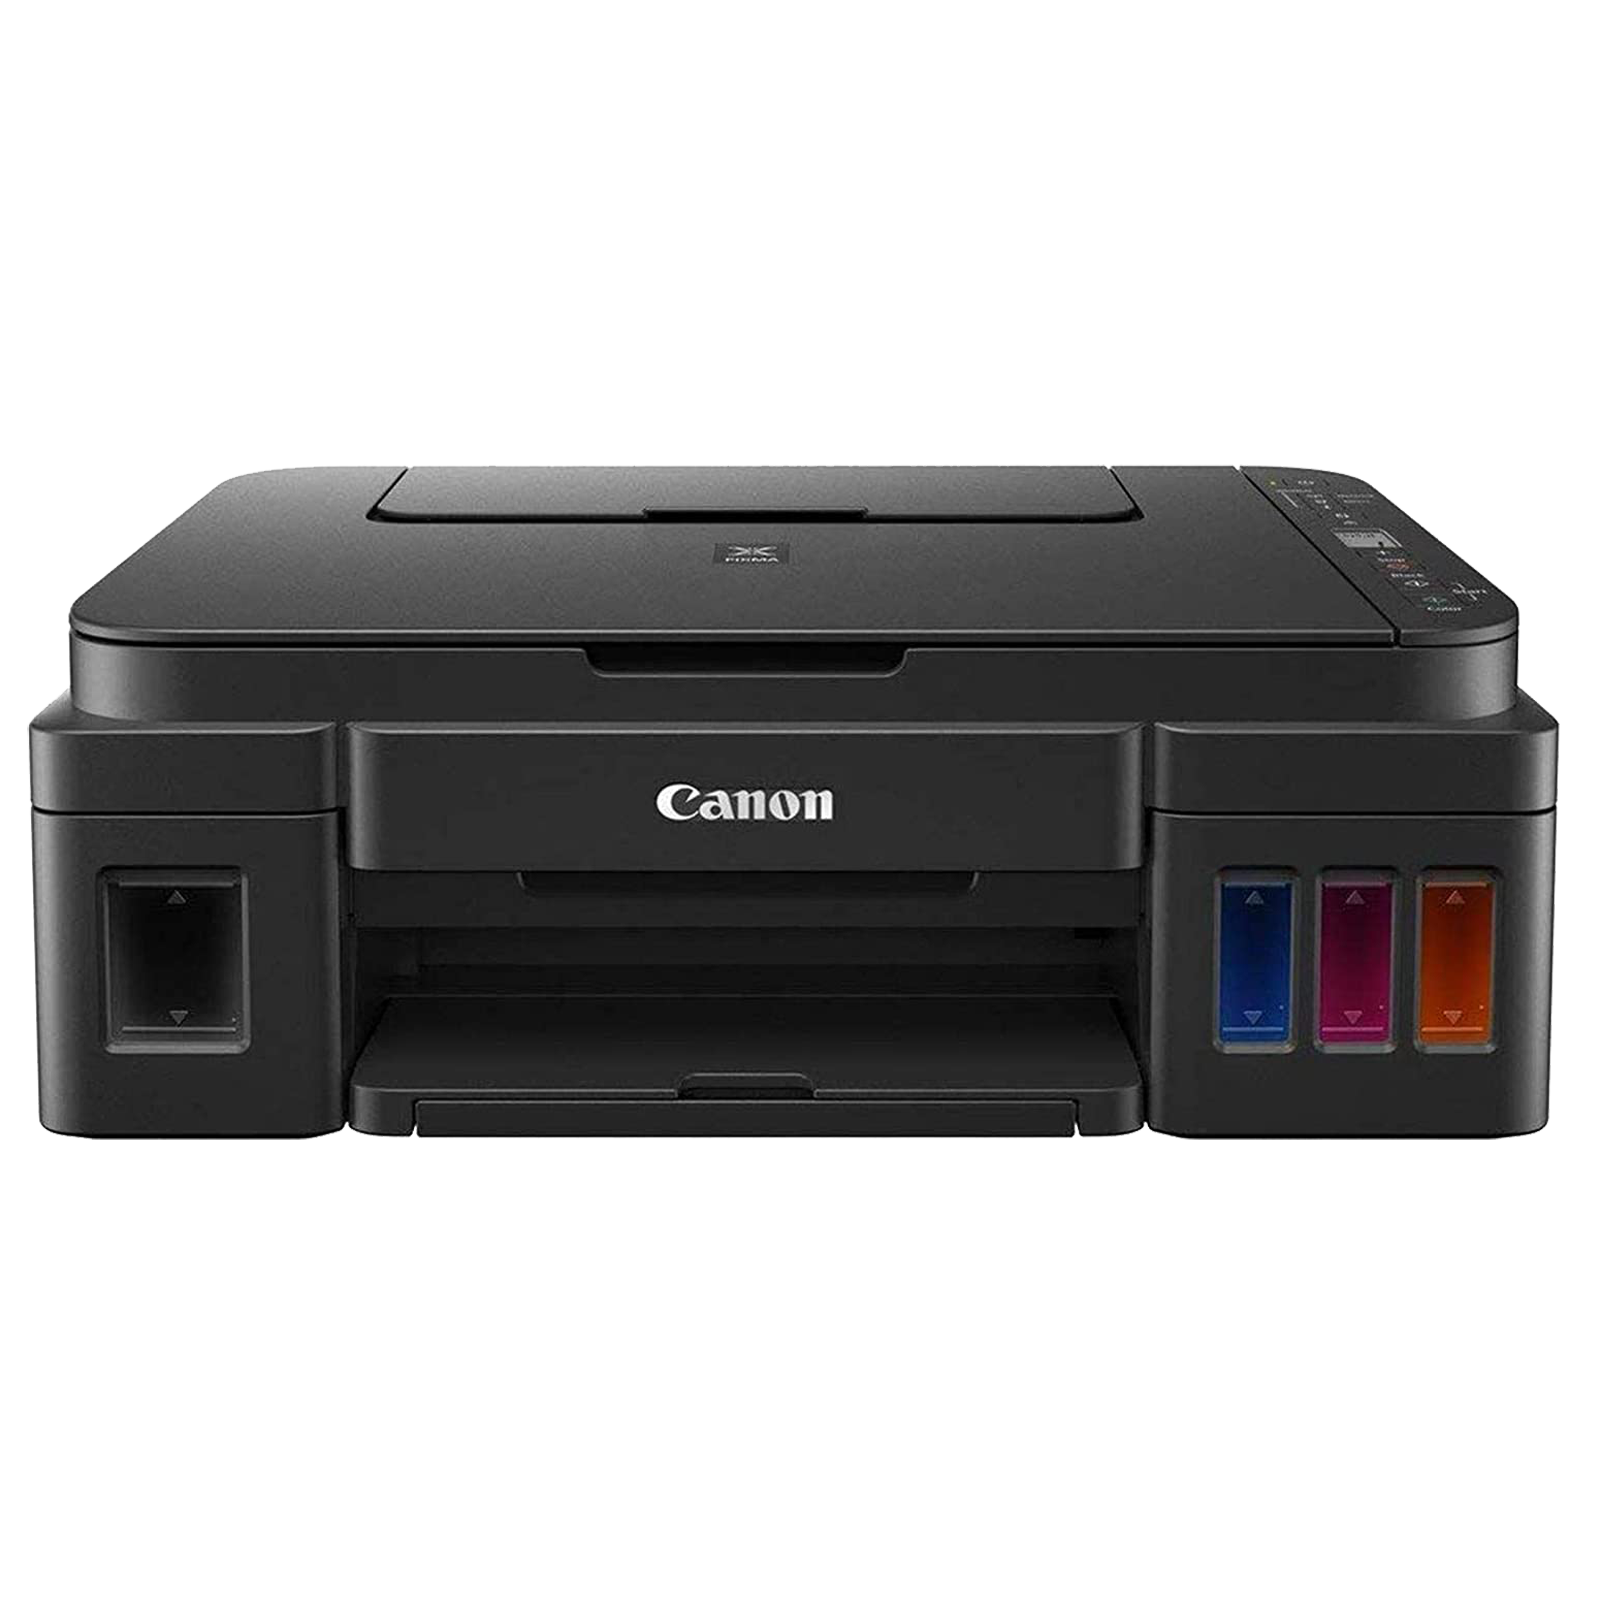 Canon Pixma G3010 All-in-One Ink Tank Printer (Wifi Connectivity, 2315C018AB, Black)_1